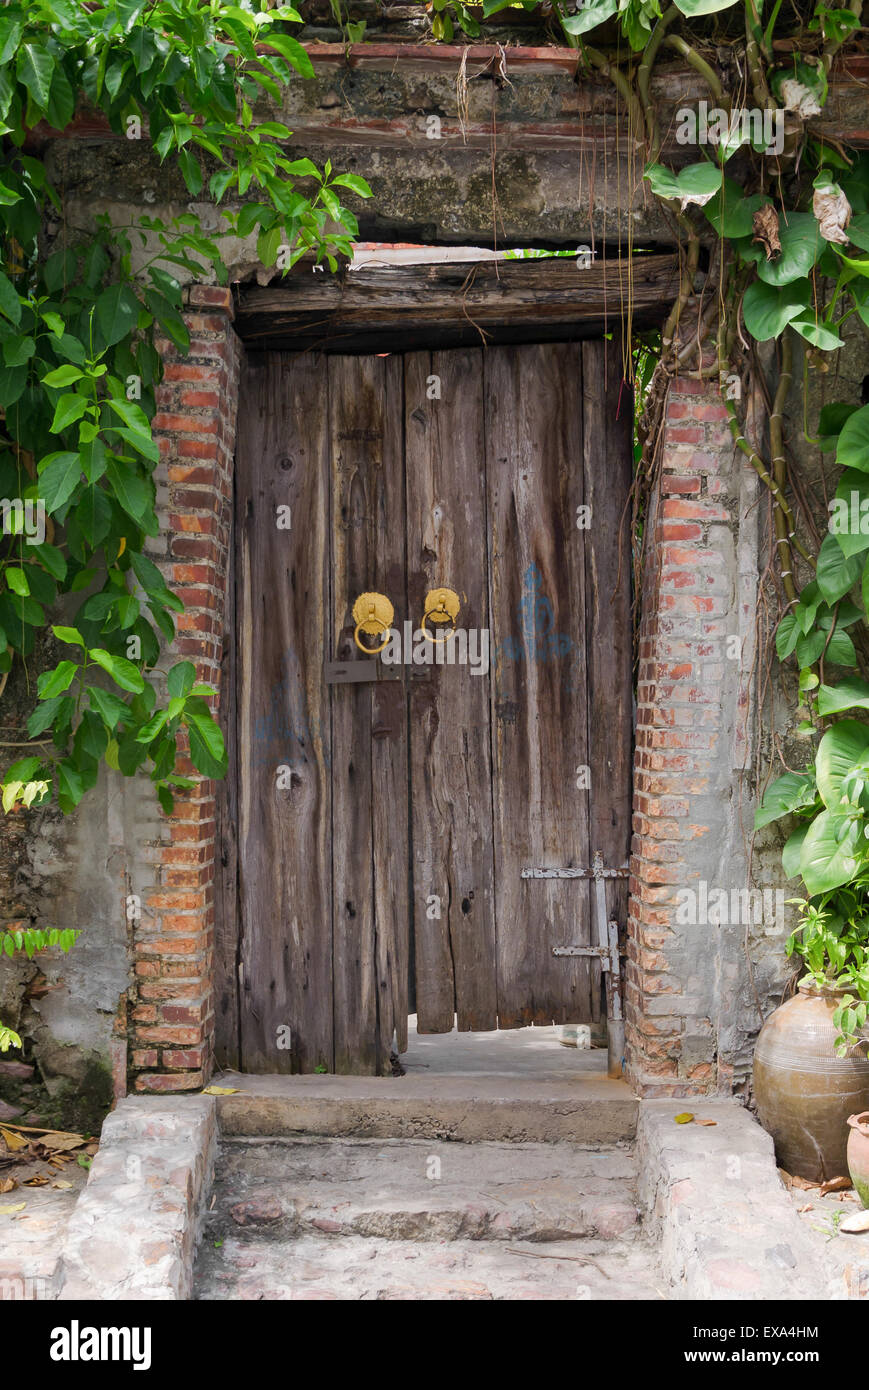 Ancient wooden gate with the inclination and decay. Stock Photo